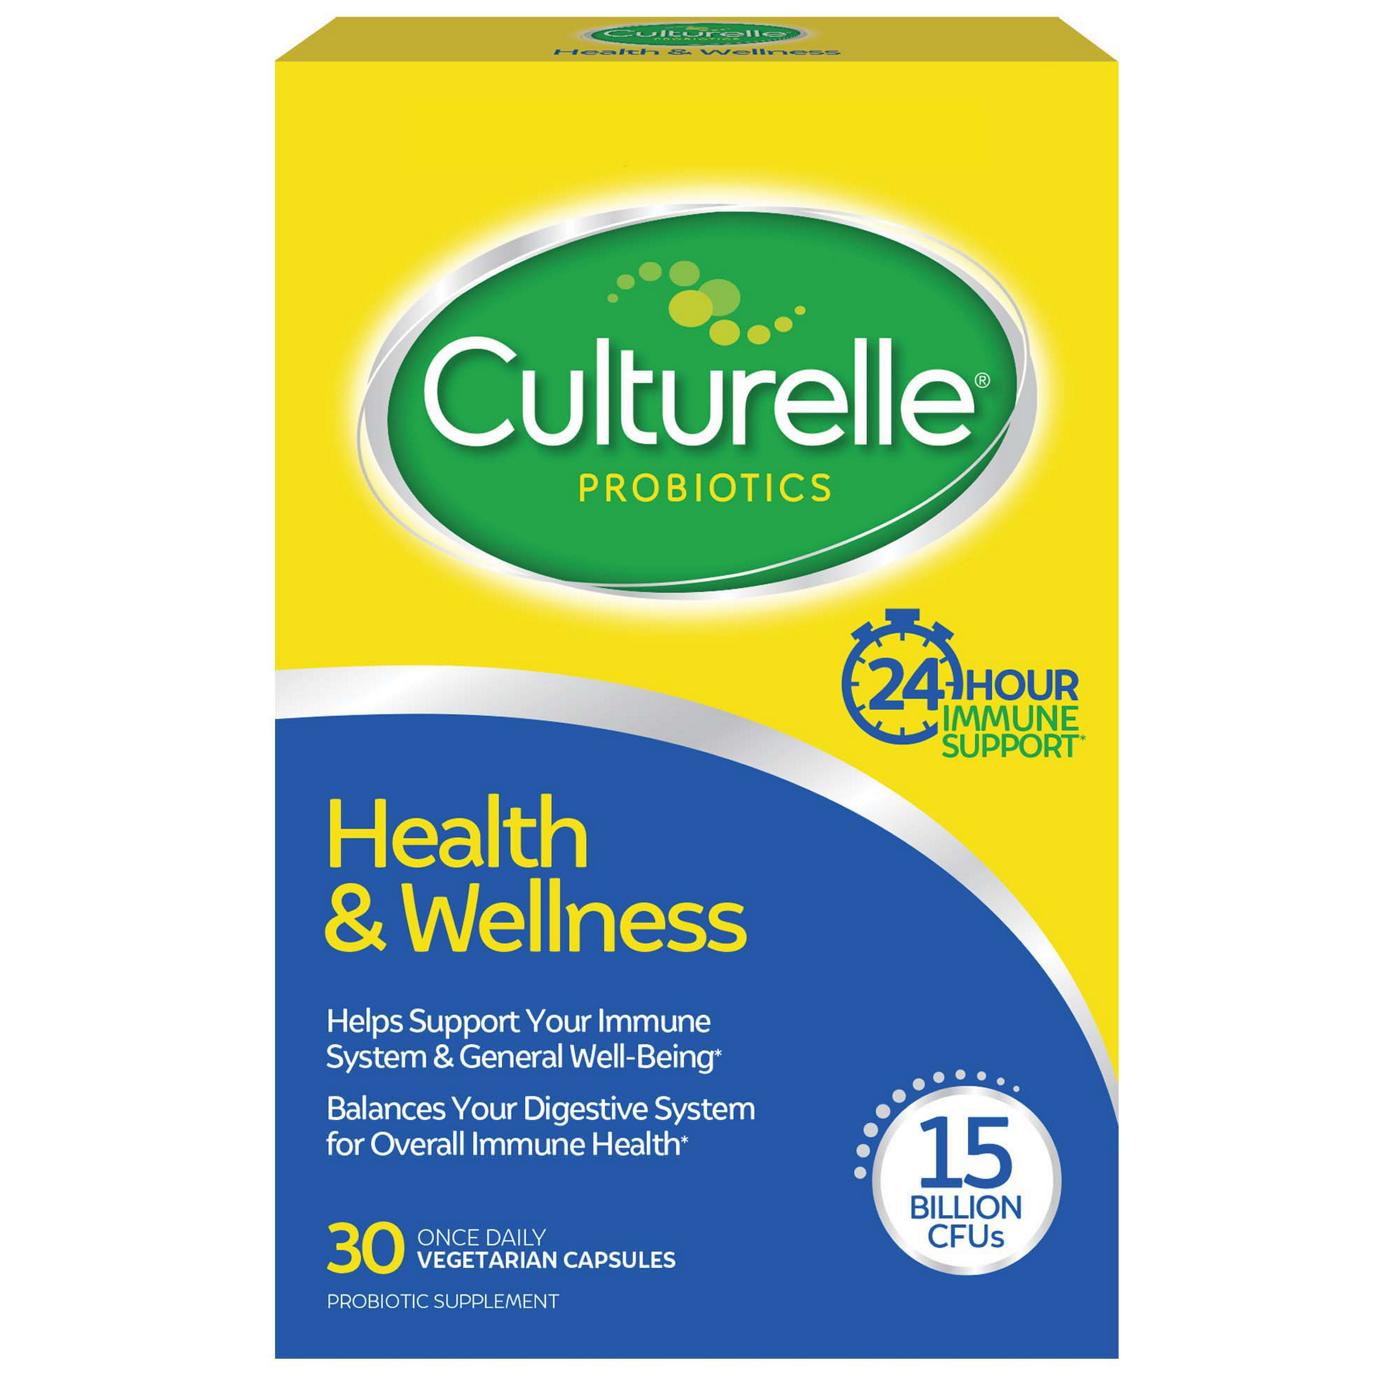 Culturelle Pro-Well Health & Wellness; image 1 of 6